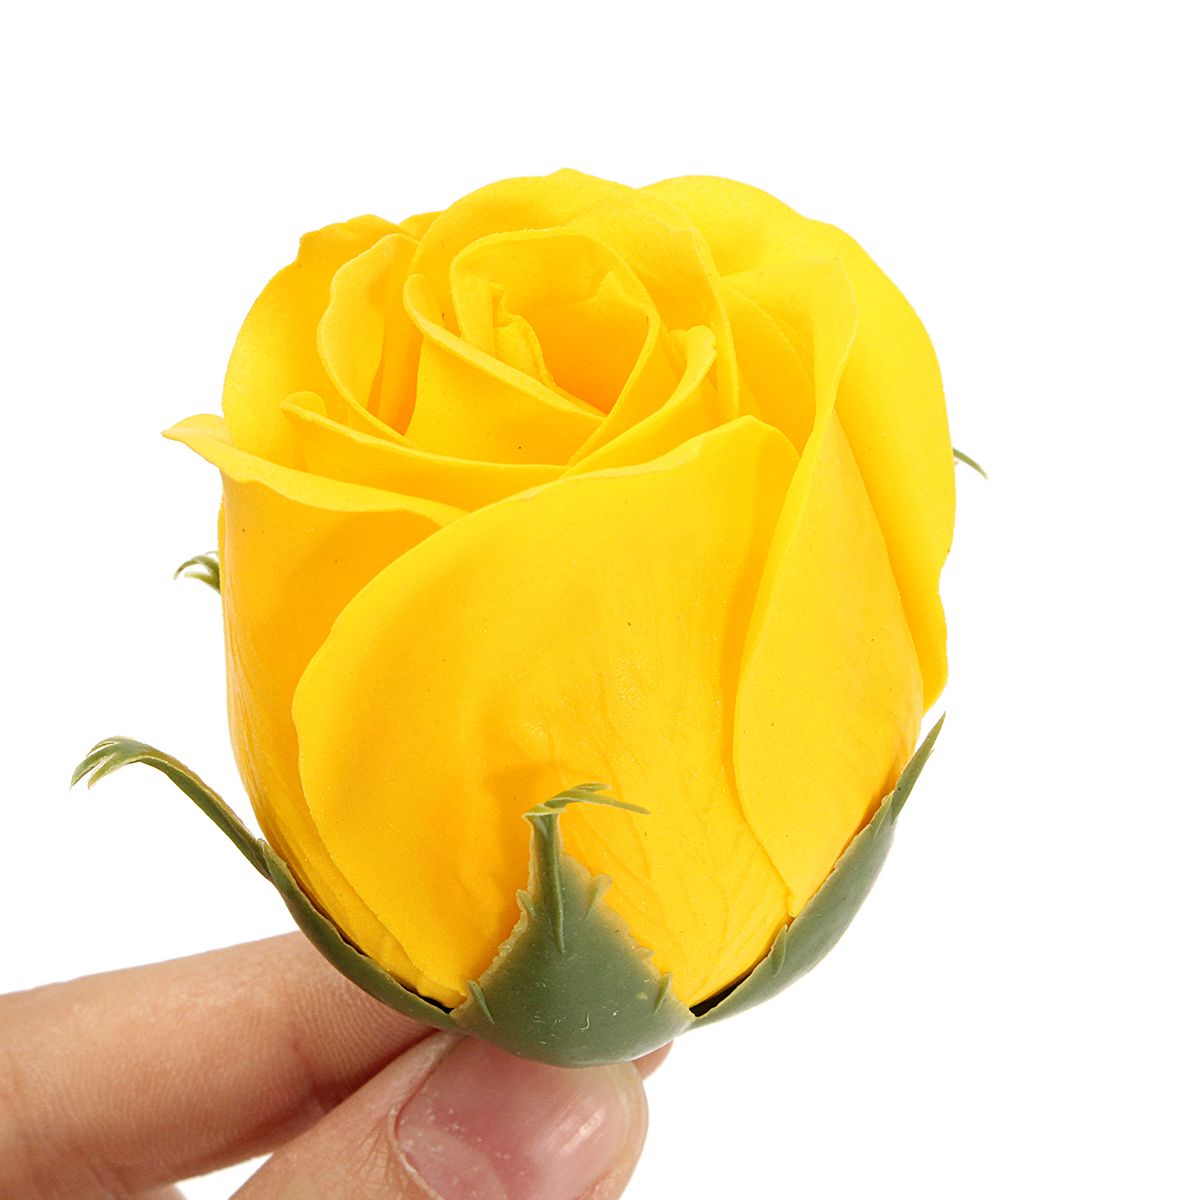 Simulation-Artificial-Rose-Soap-Flower-For-Wedding-Party-Home-Decoration-Valentines-Day-Gift-1069981